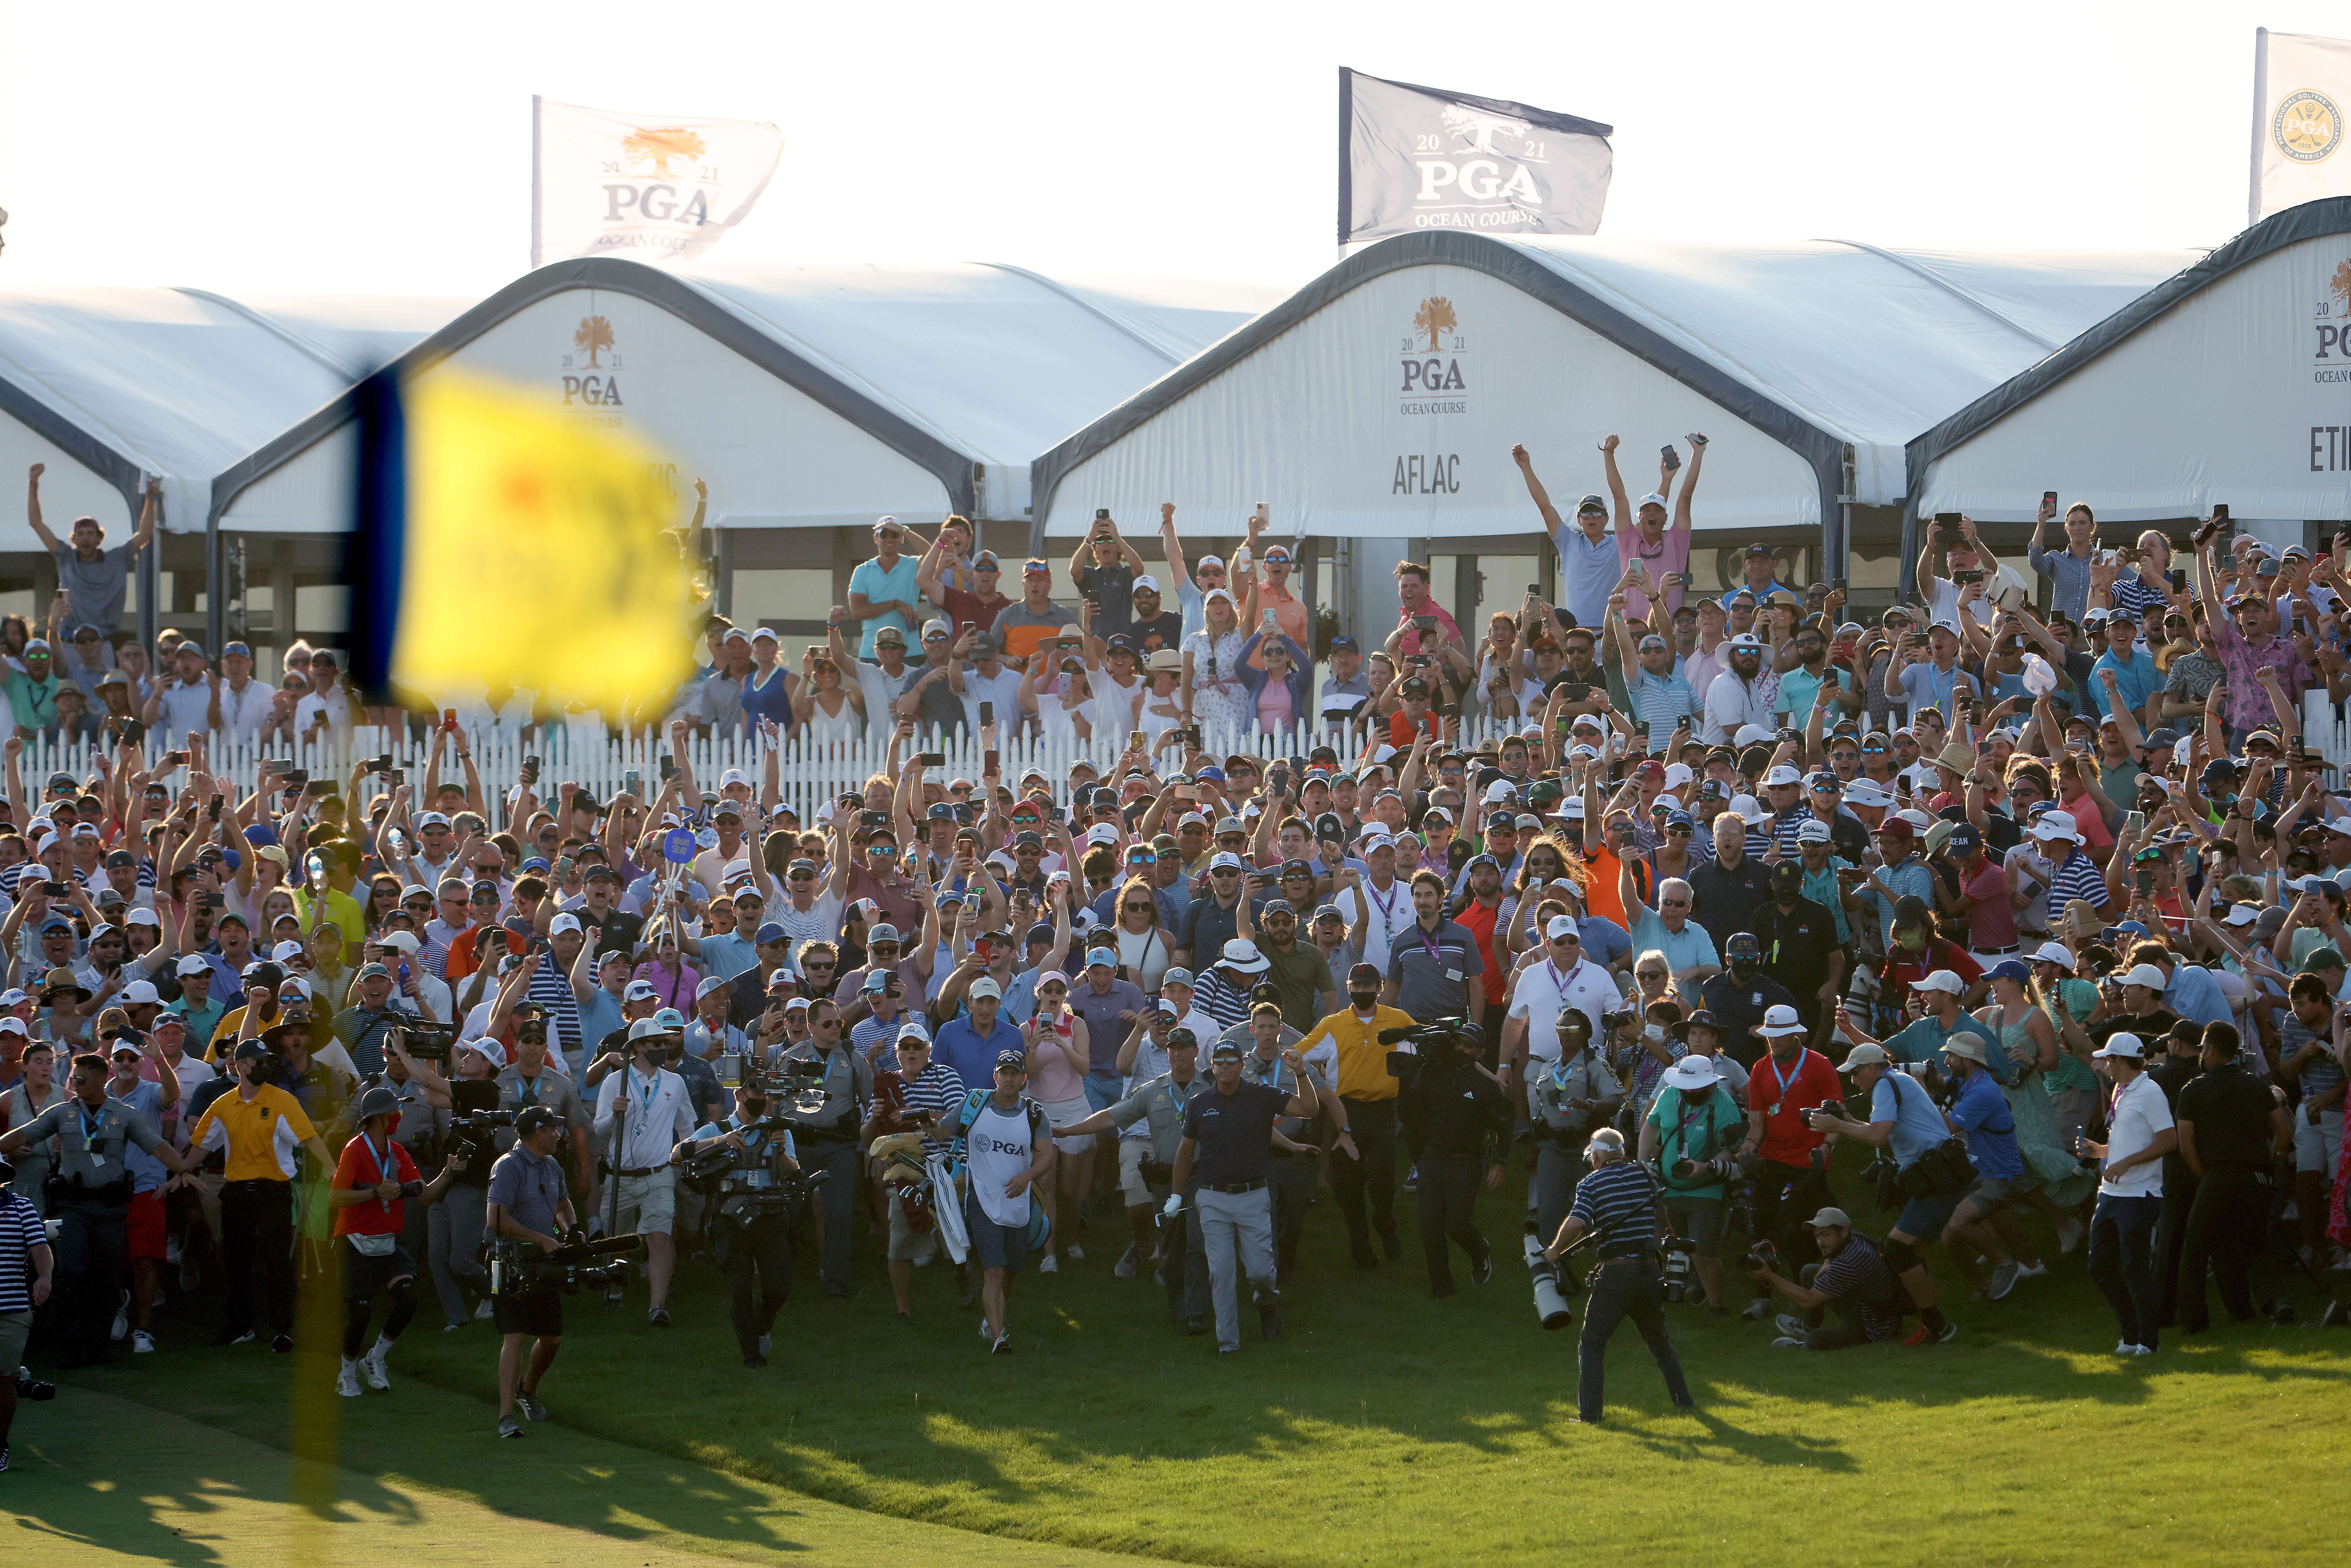 Phil Mickelson walks up the 18th fairway followed by a massive crowd at the conclusion of the 2021 PGA Championship. Photo: AFP